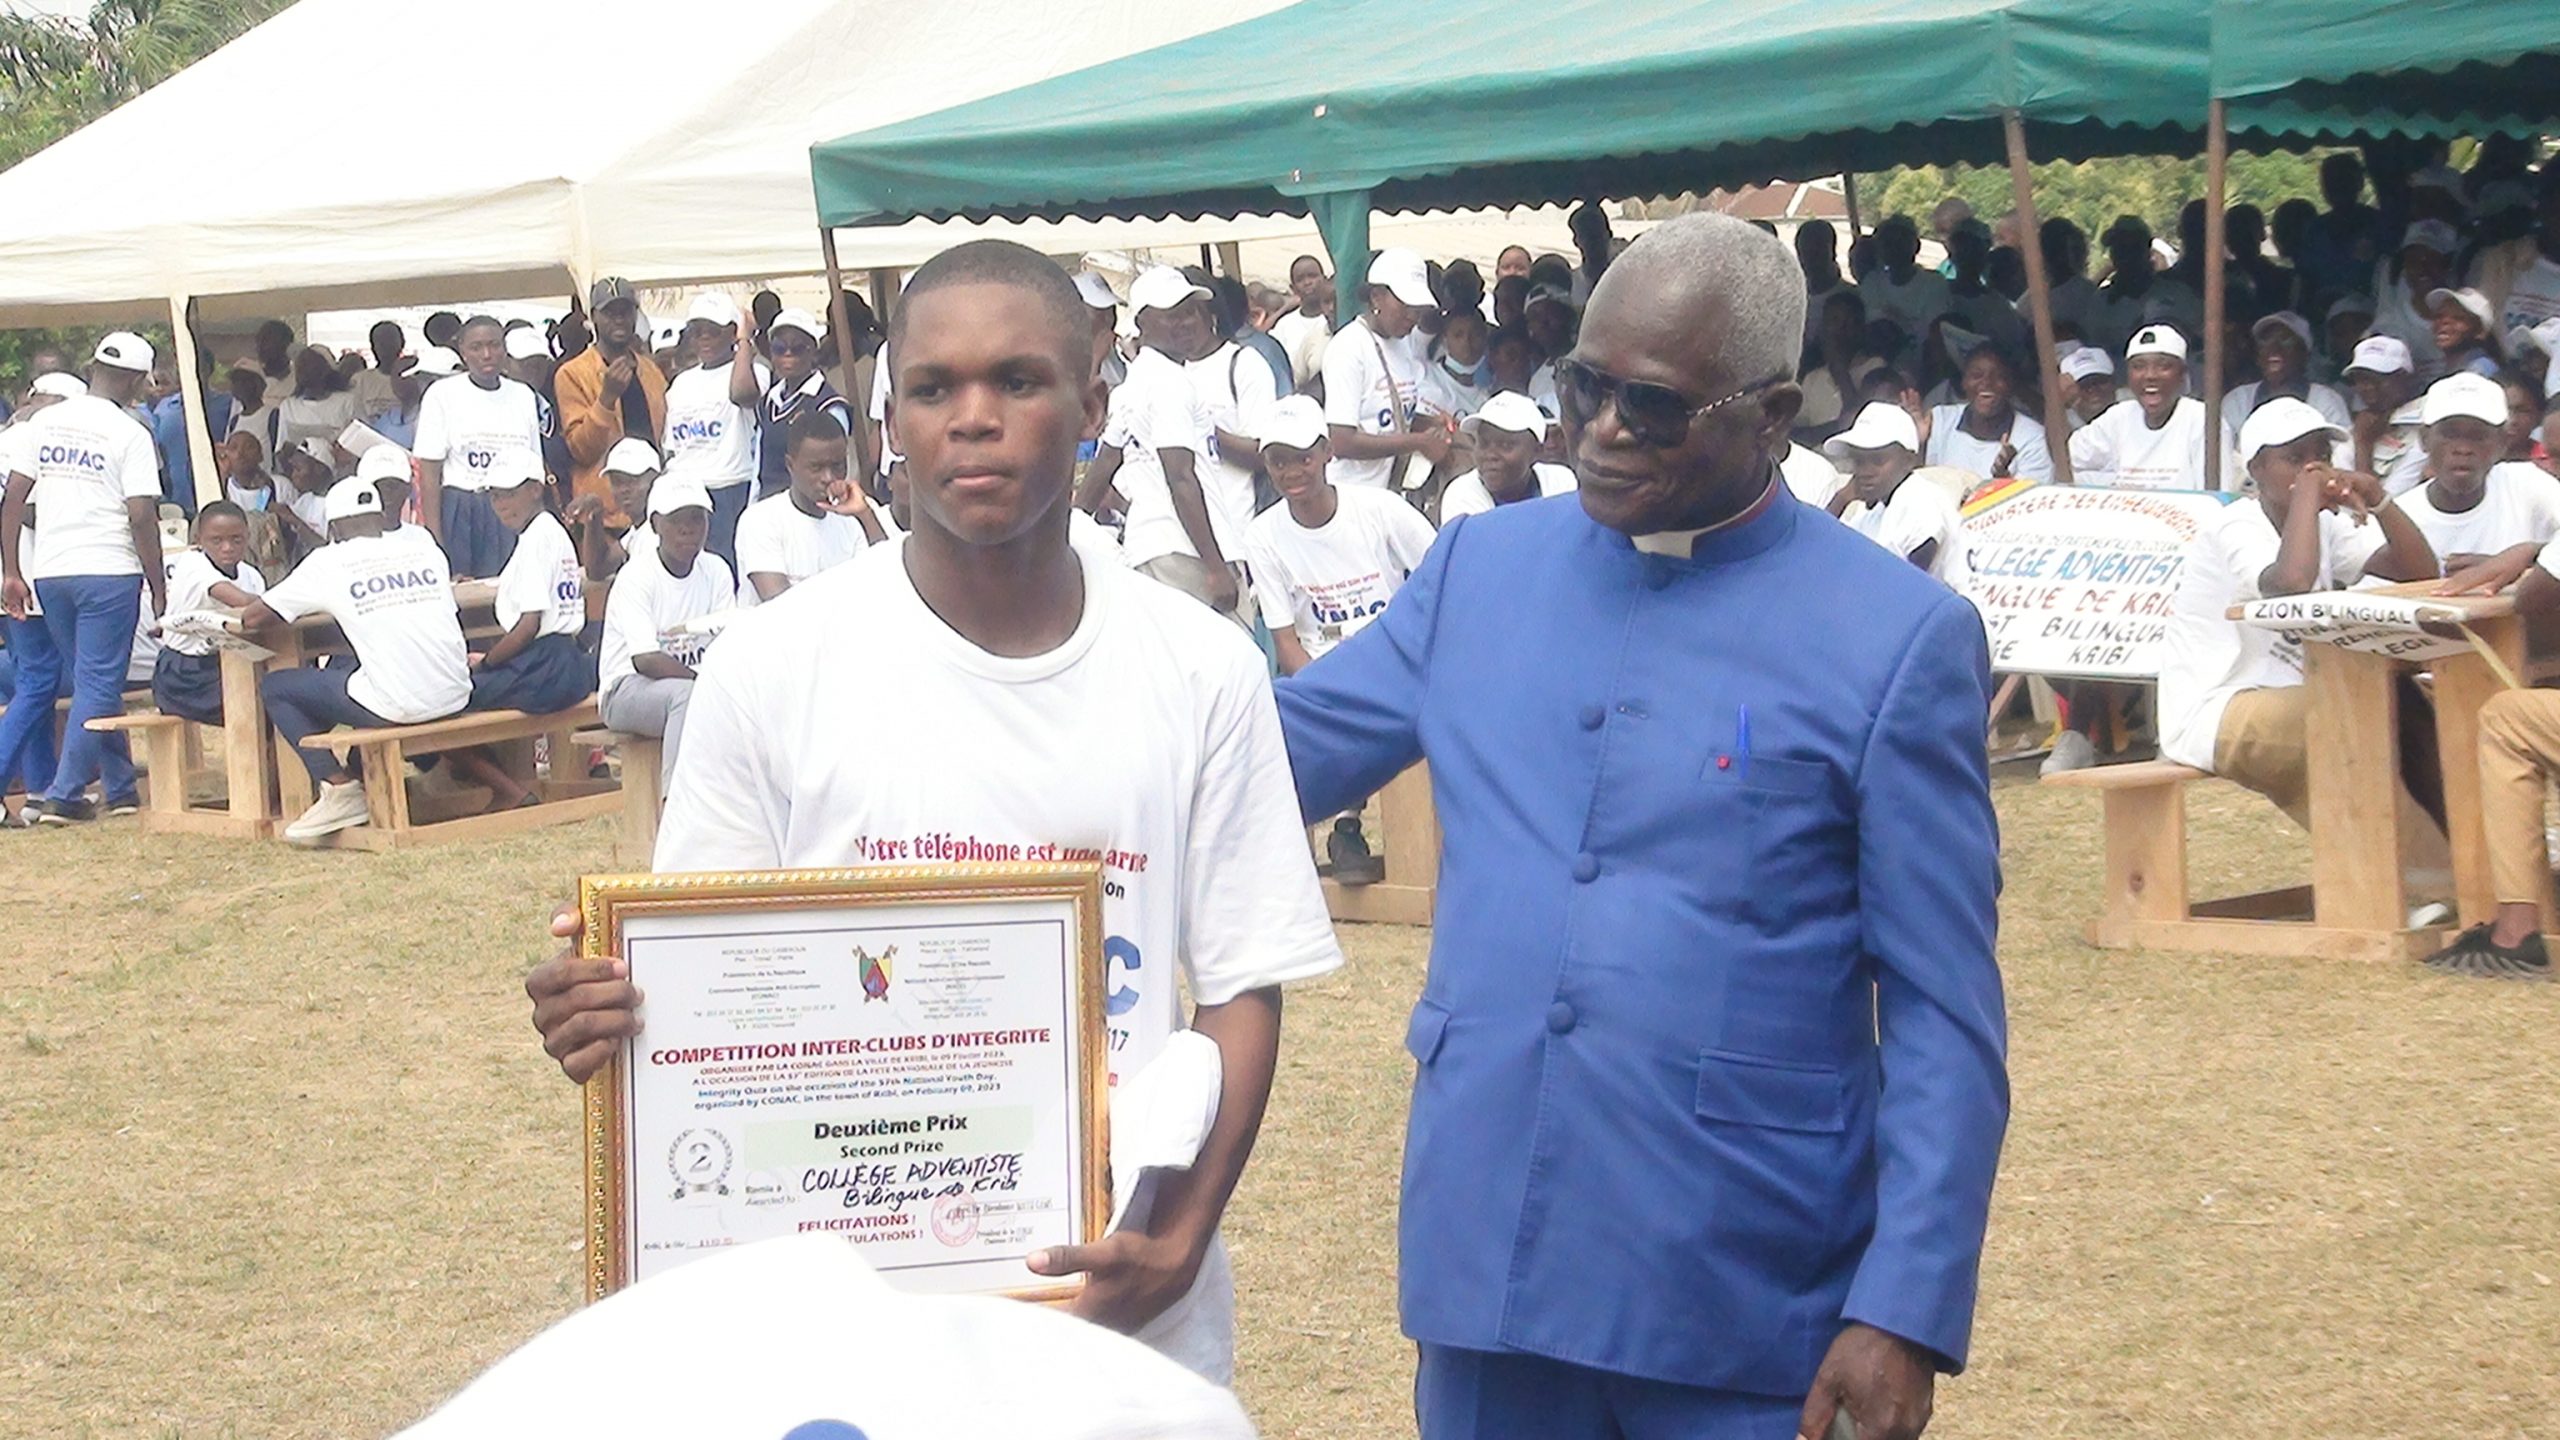 KRIBI: CONAC CALLS FOR INTEGRITY AND MORAL PROBITY AMONGST YOUTHS